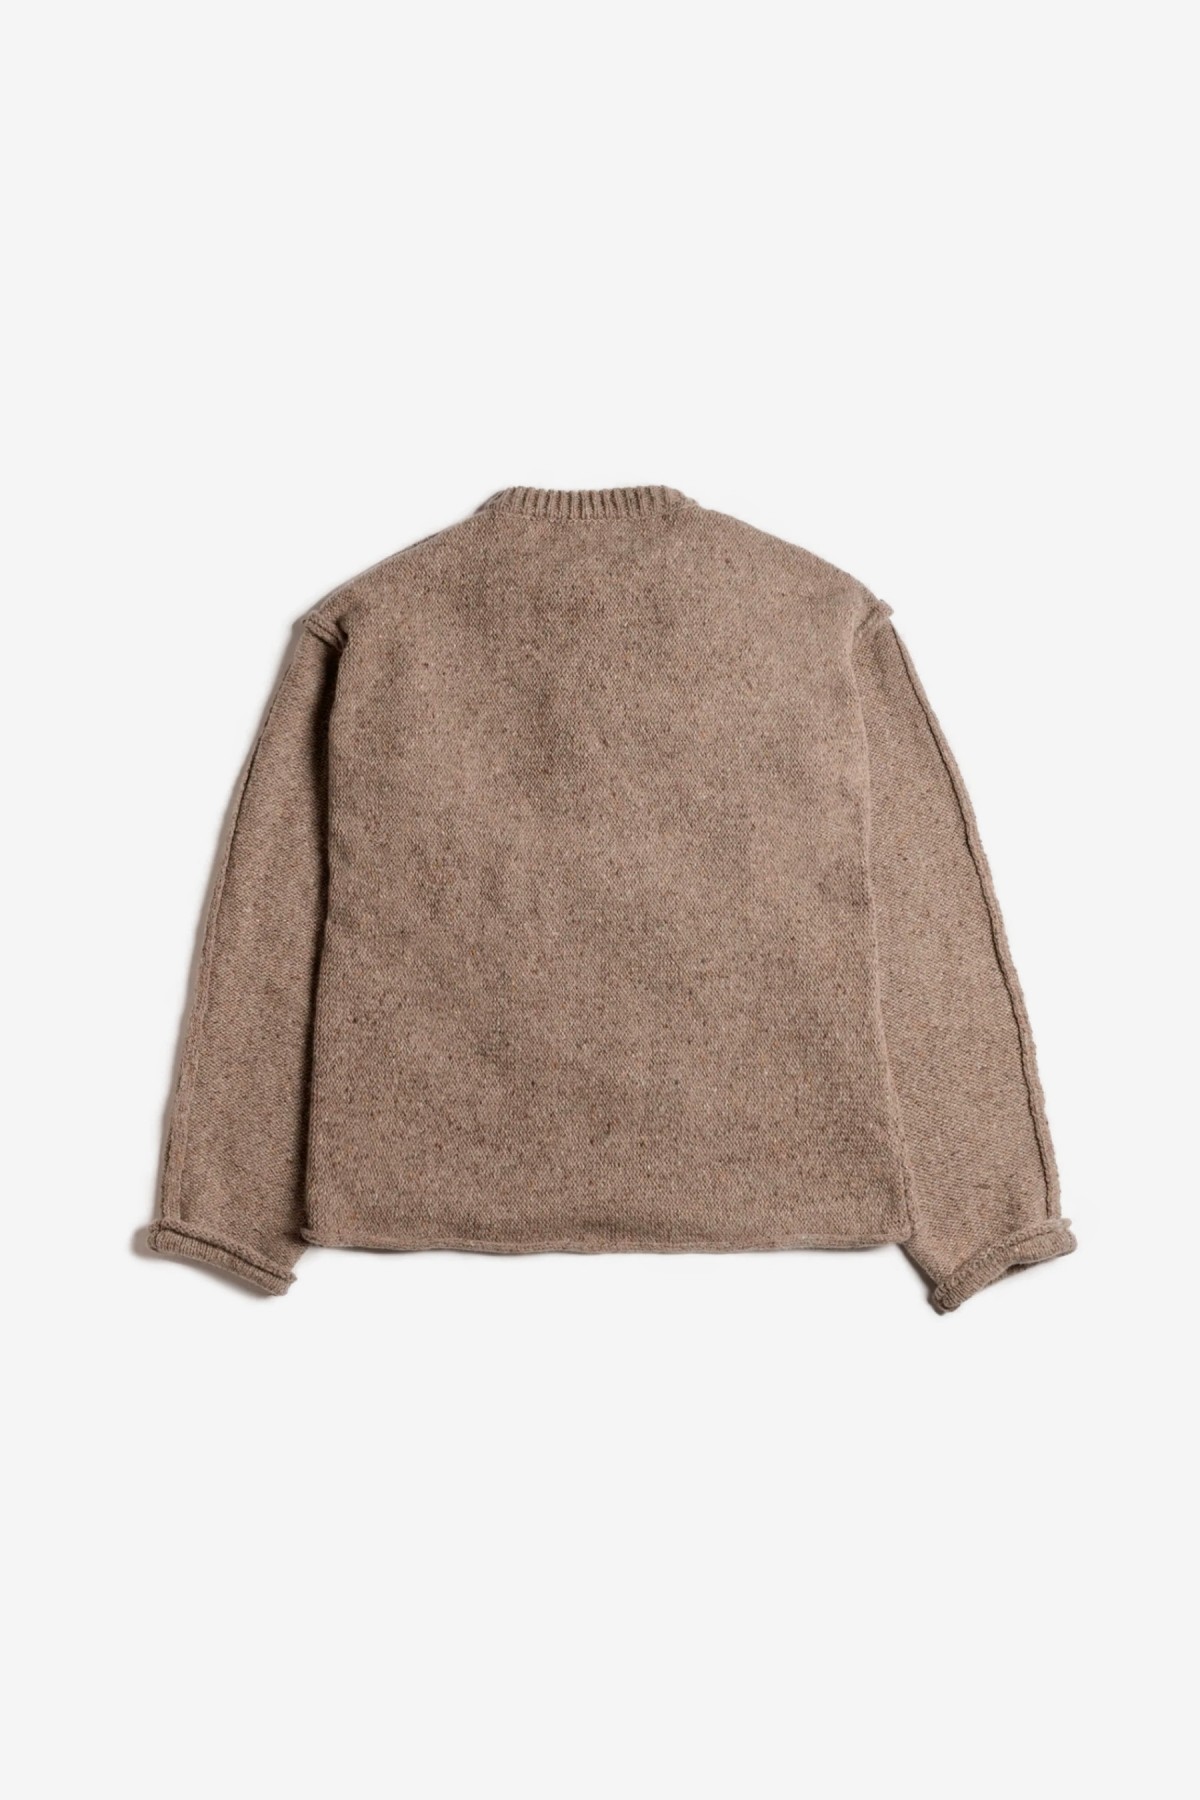 Satta Exposed Seam Knit in Speckled Brown